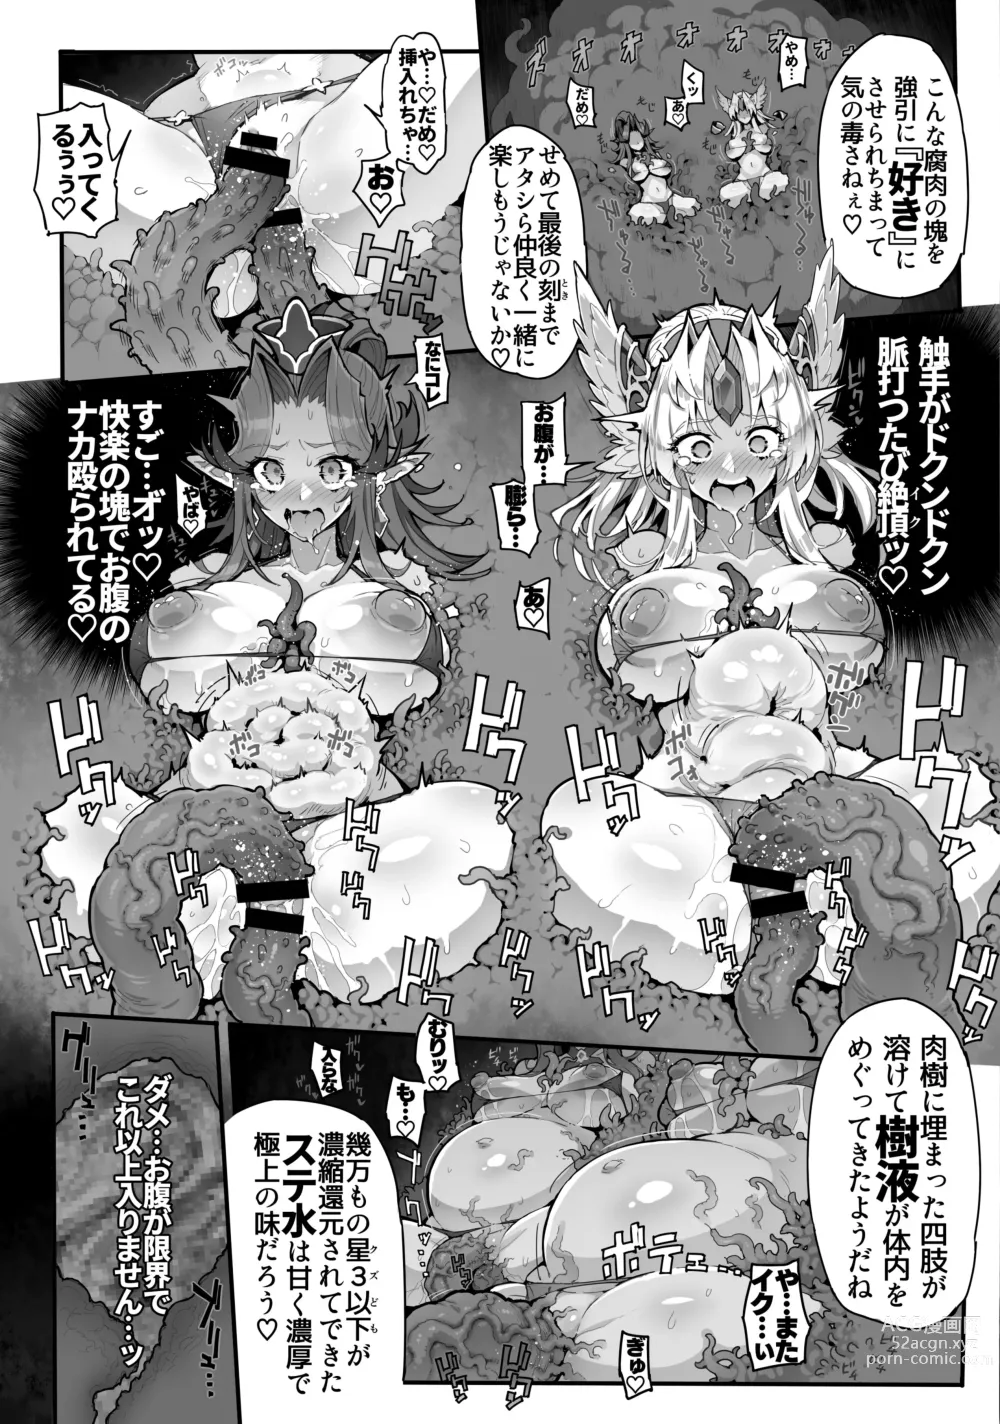 Page 22 of doujinshi Re Notice: End of App Service